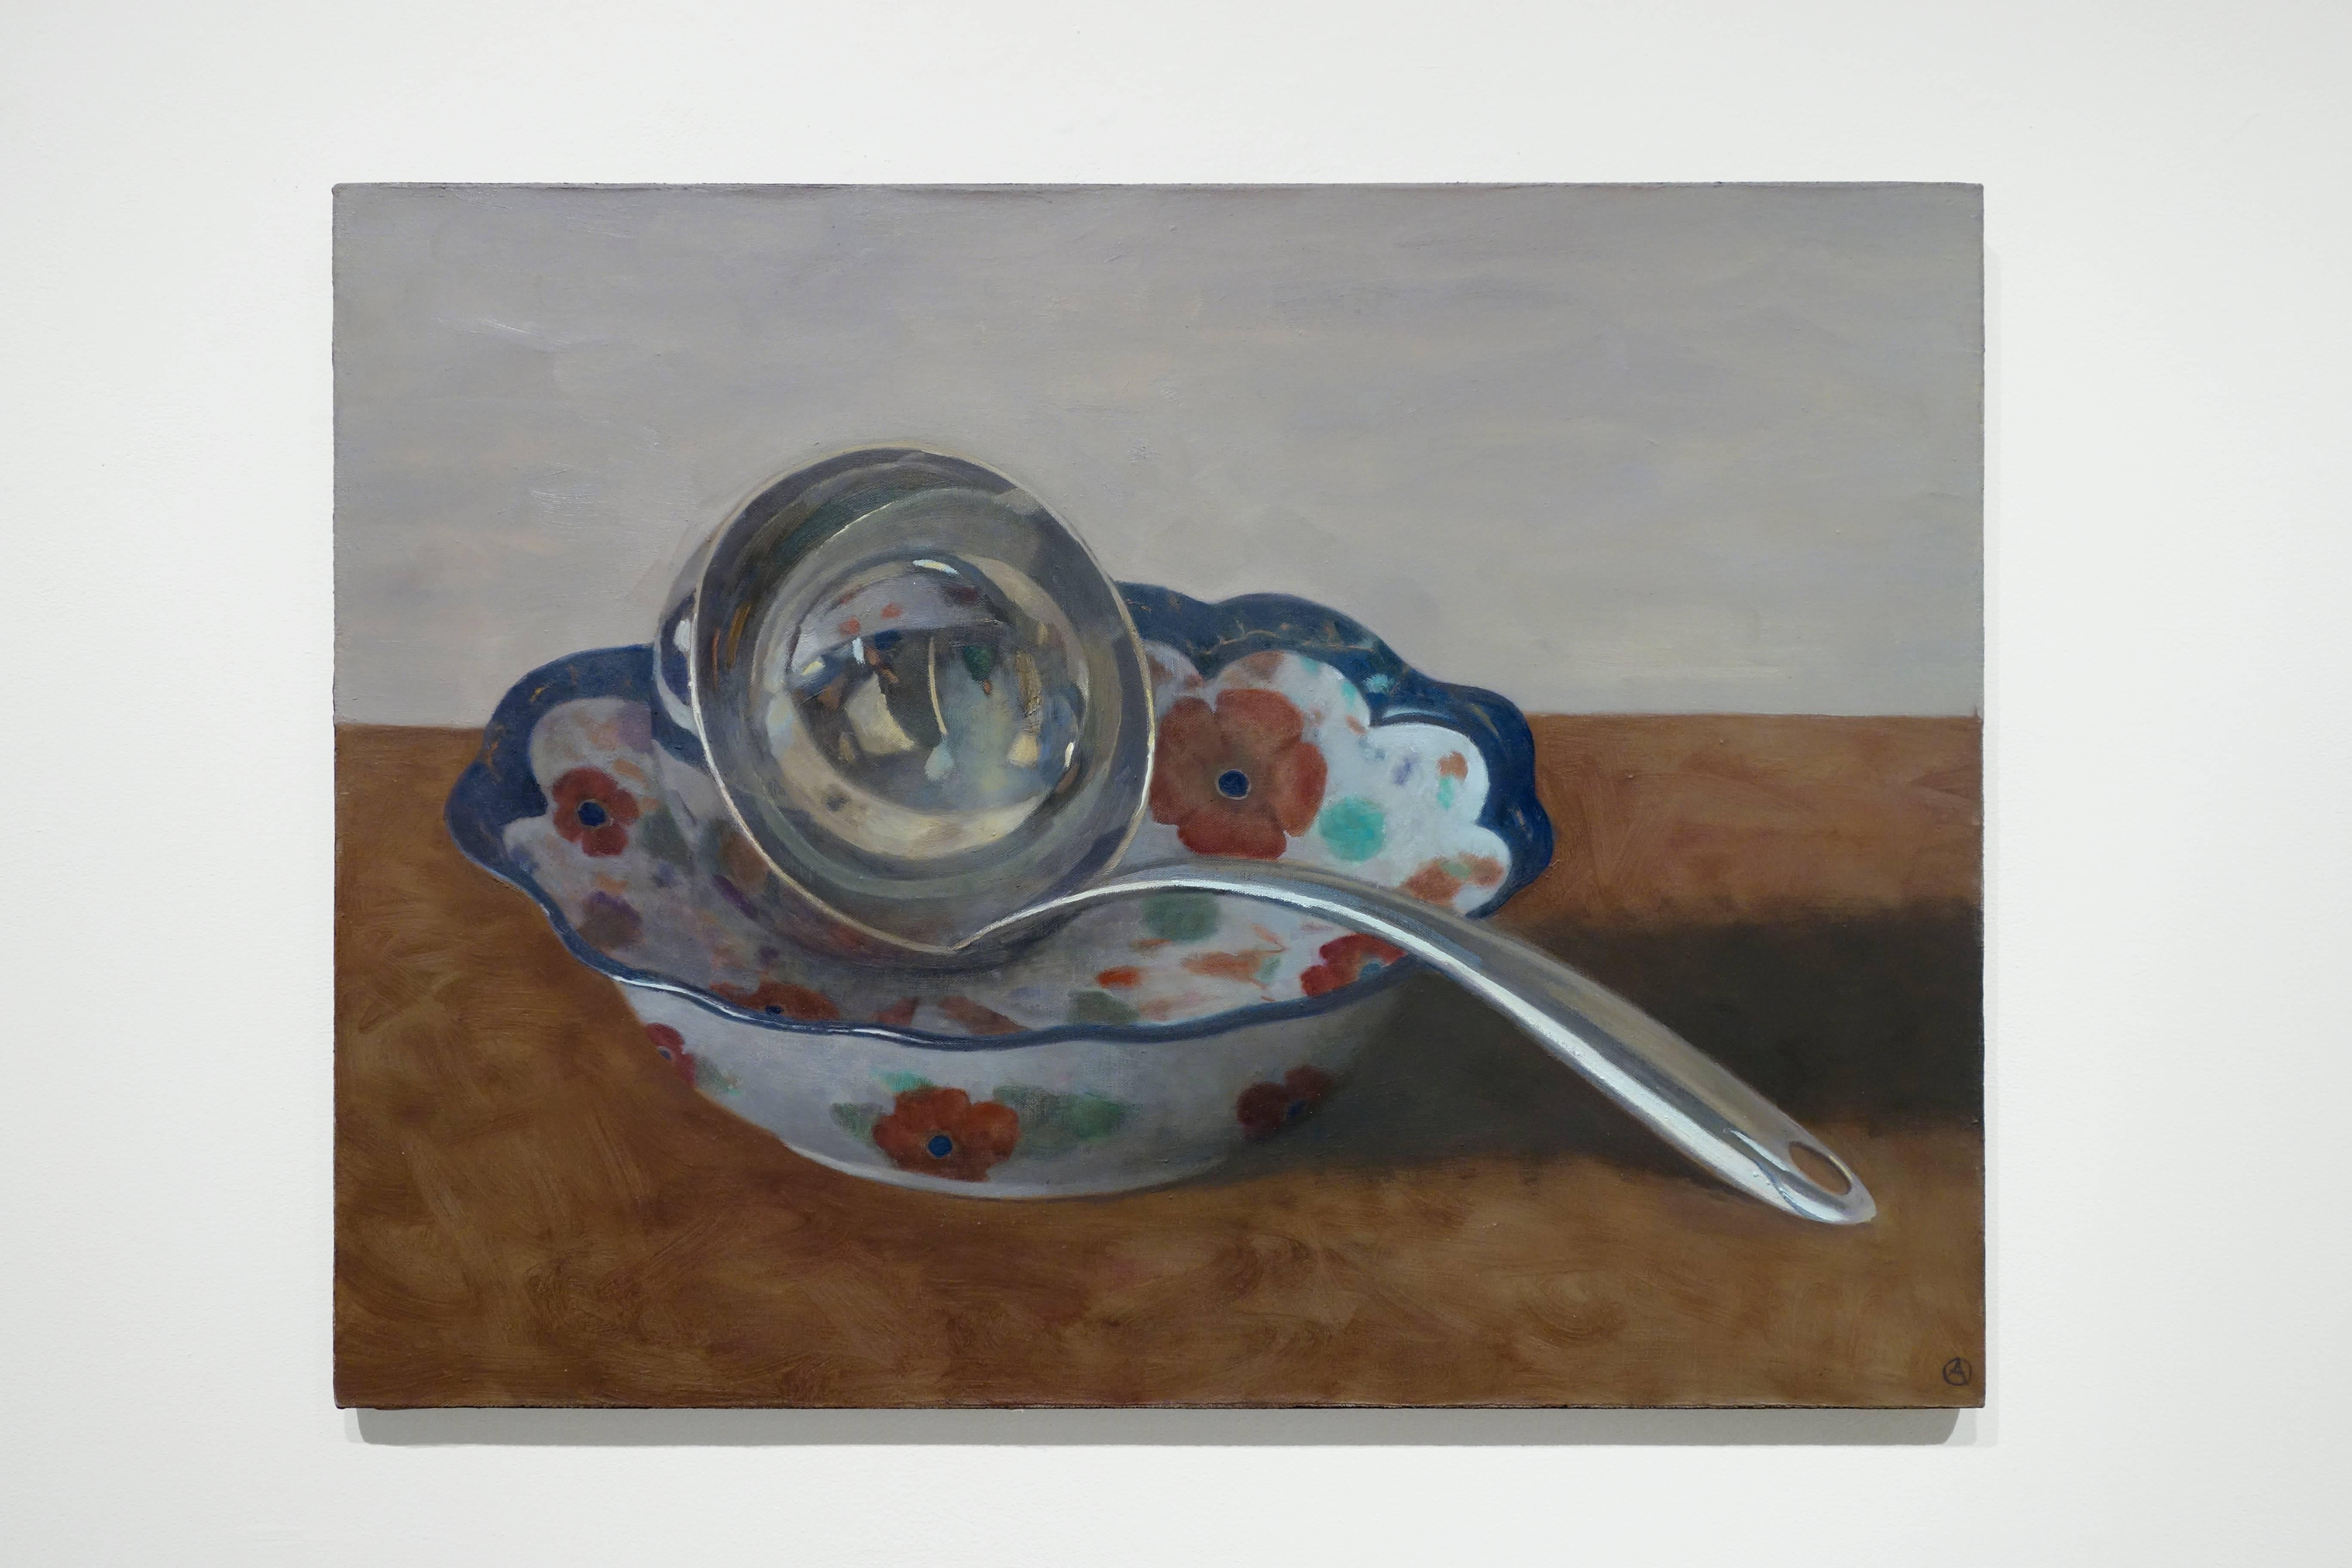 LADLE IN FLORAL BOWL, brown table, bowl with floral design, still life - Painting by Olga Antonova